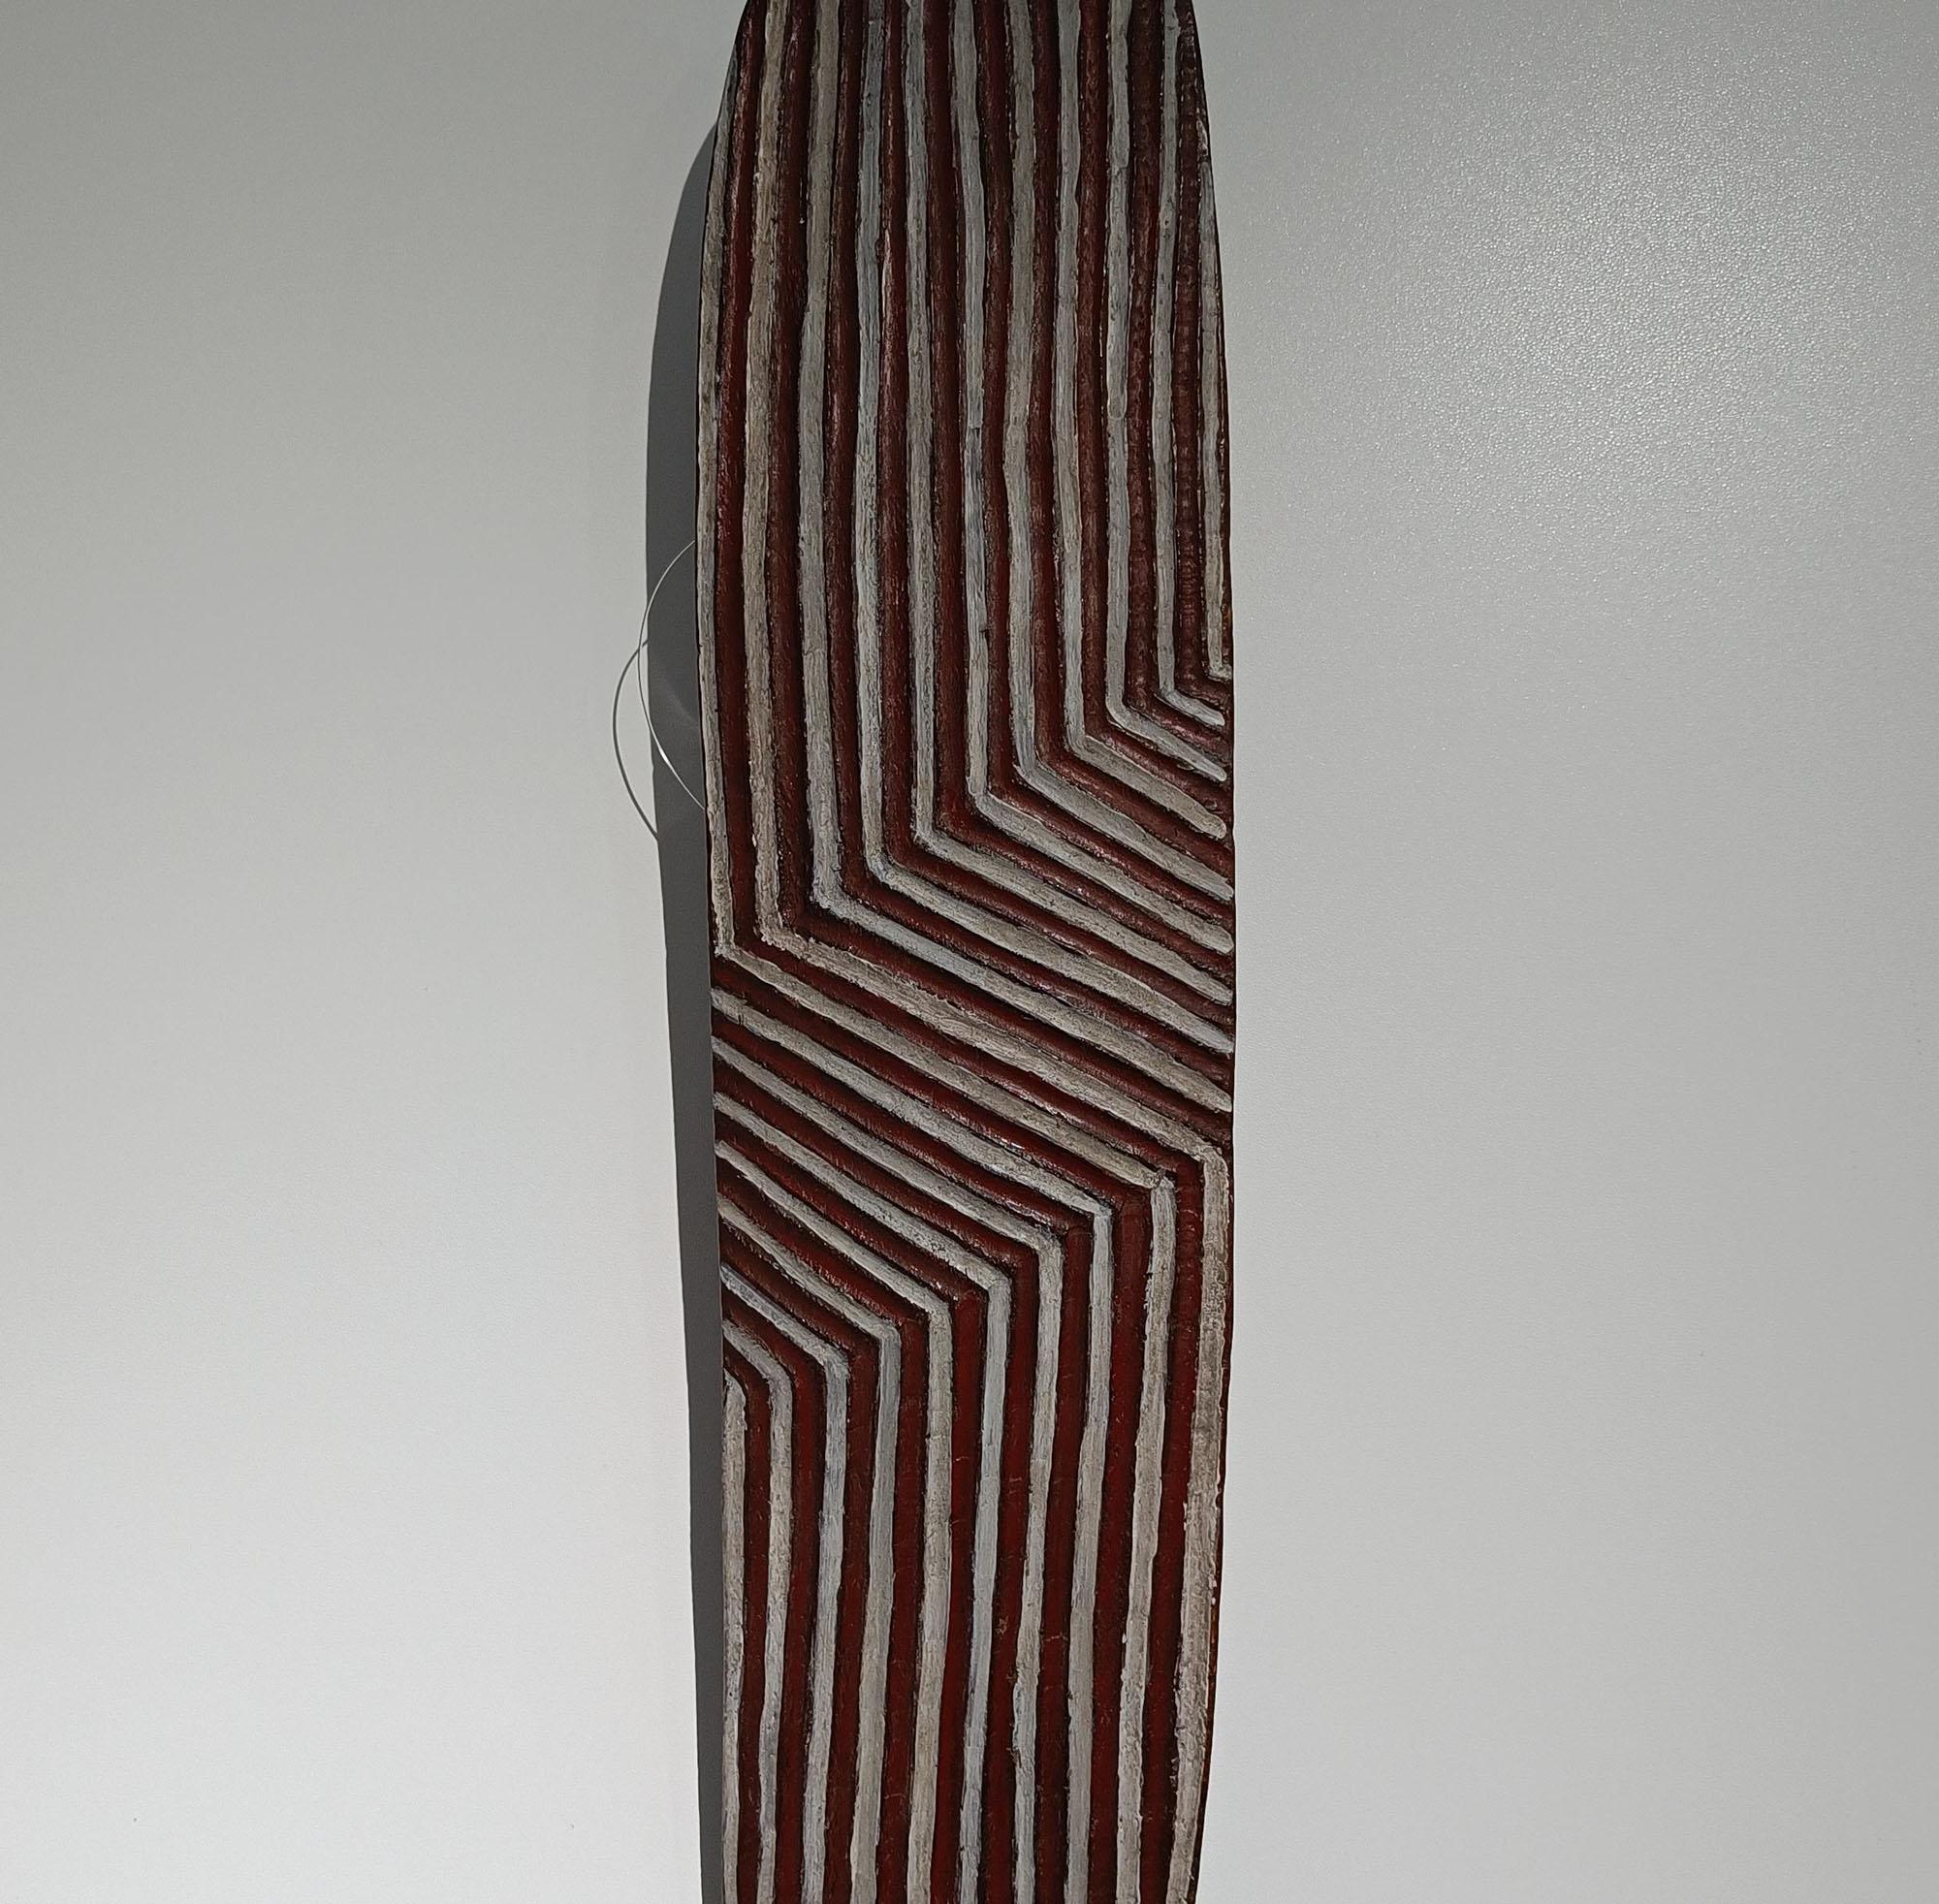 Fine large Antique Aboriginal Wunda shield in hard wood carved on both sides with a highly artistic Zigzag Geometric fluted design colored with red and and white pigment & paint.
These shields would have been used during a culturally significant